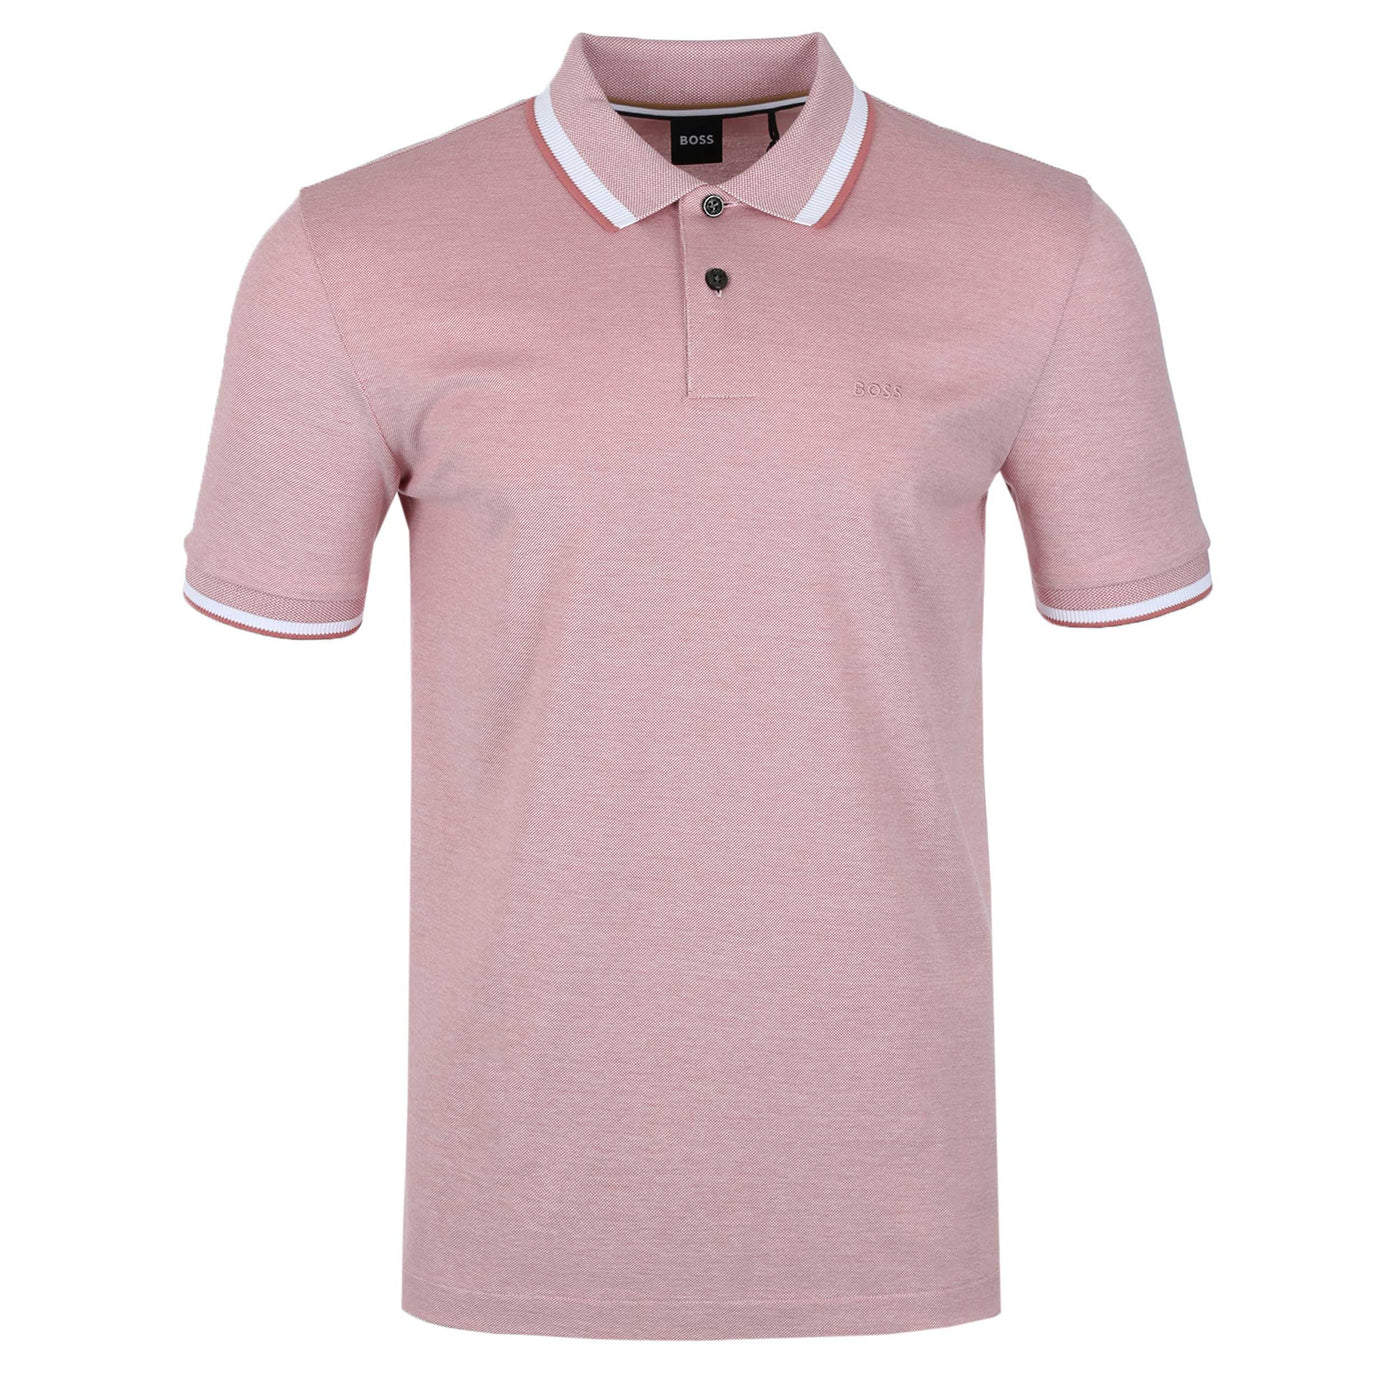 BOSS Parlay 183 Polo Shirt in Mid Pink